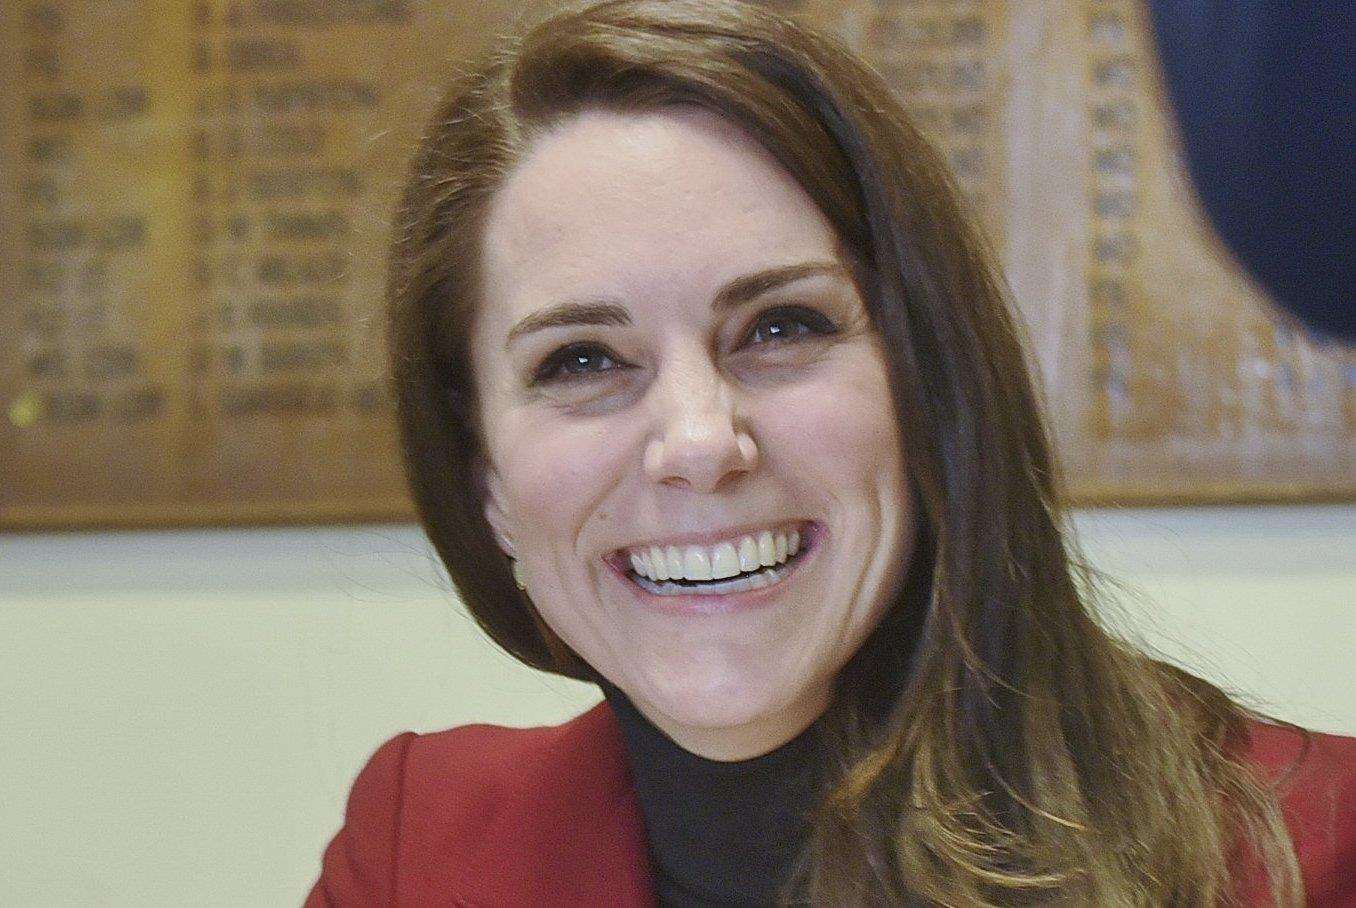 The Duchess of Cambridge is known to be a fan of LK Bennett's clothes